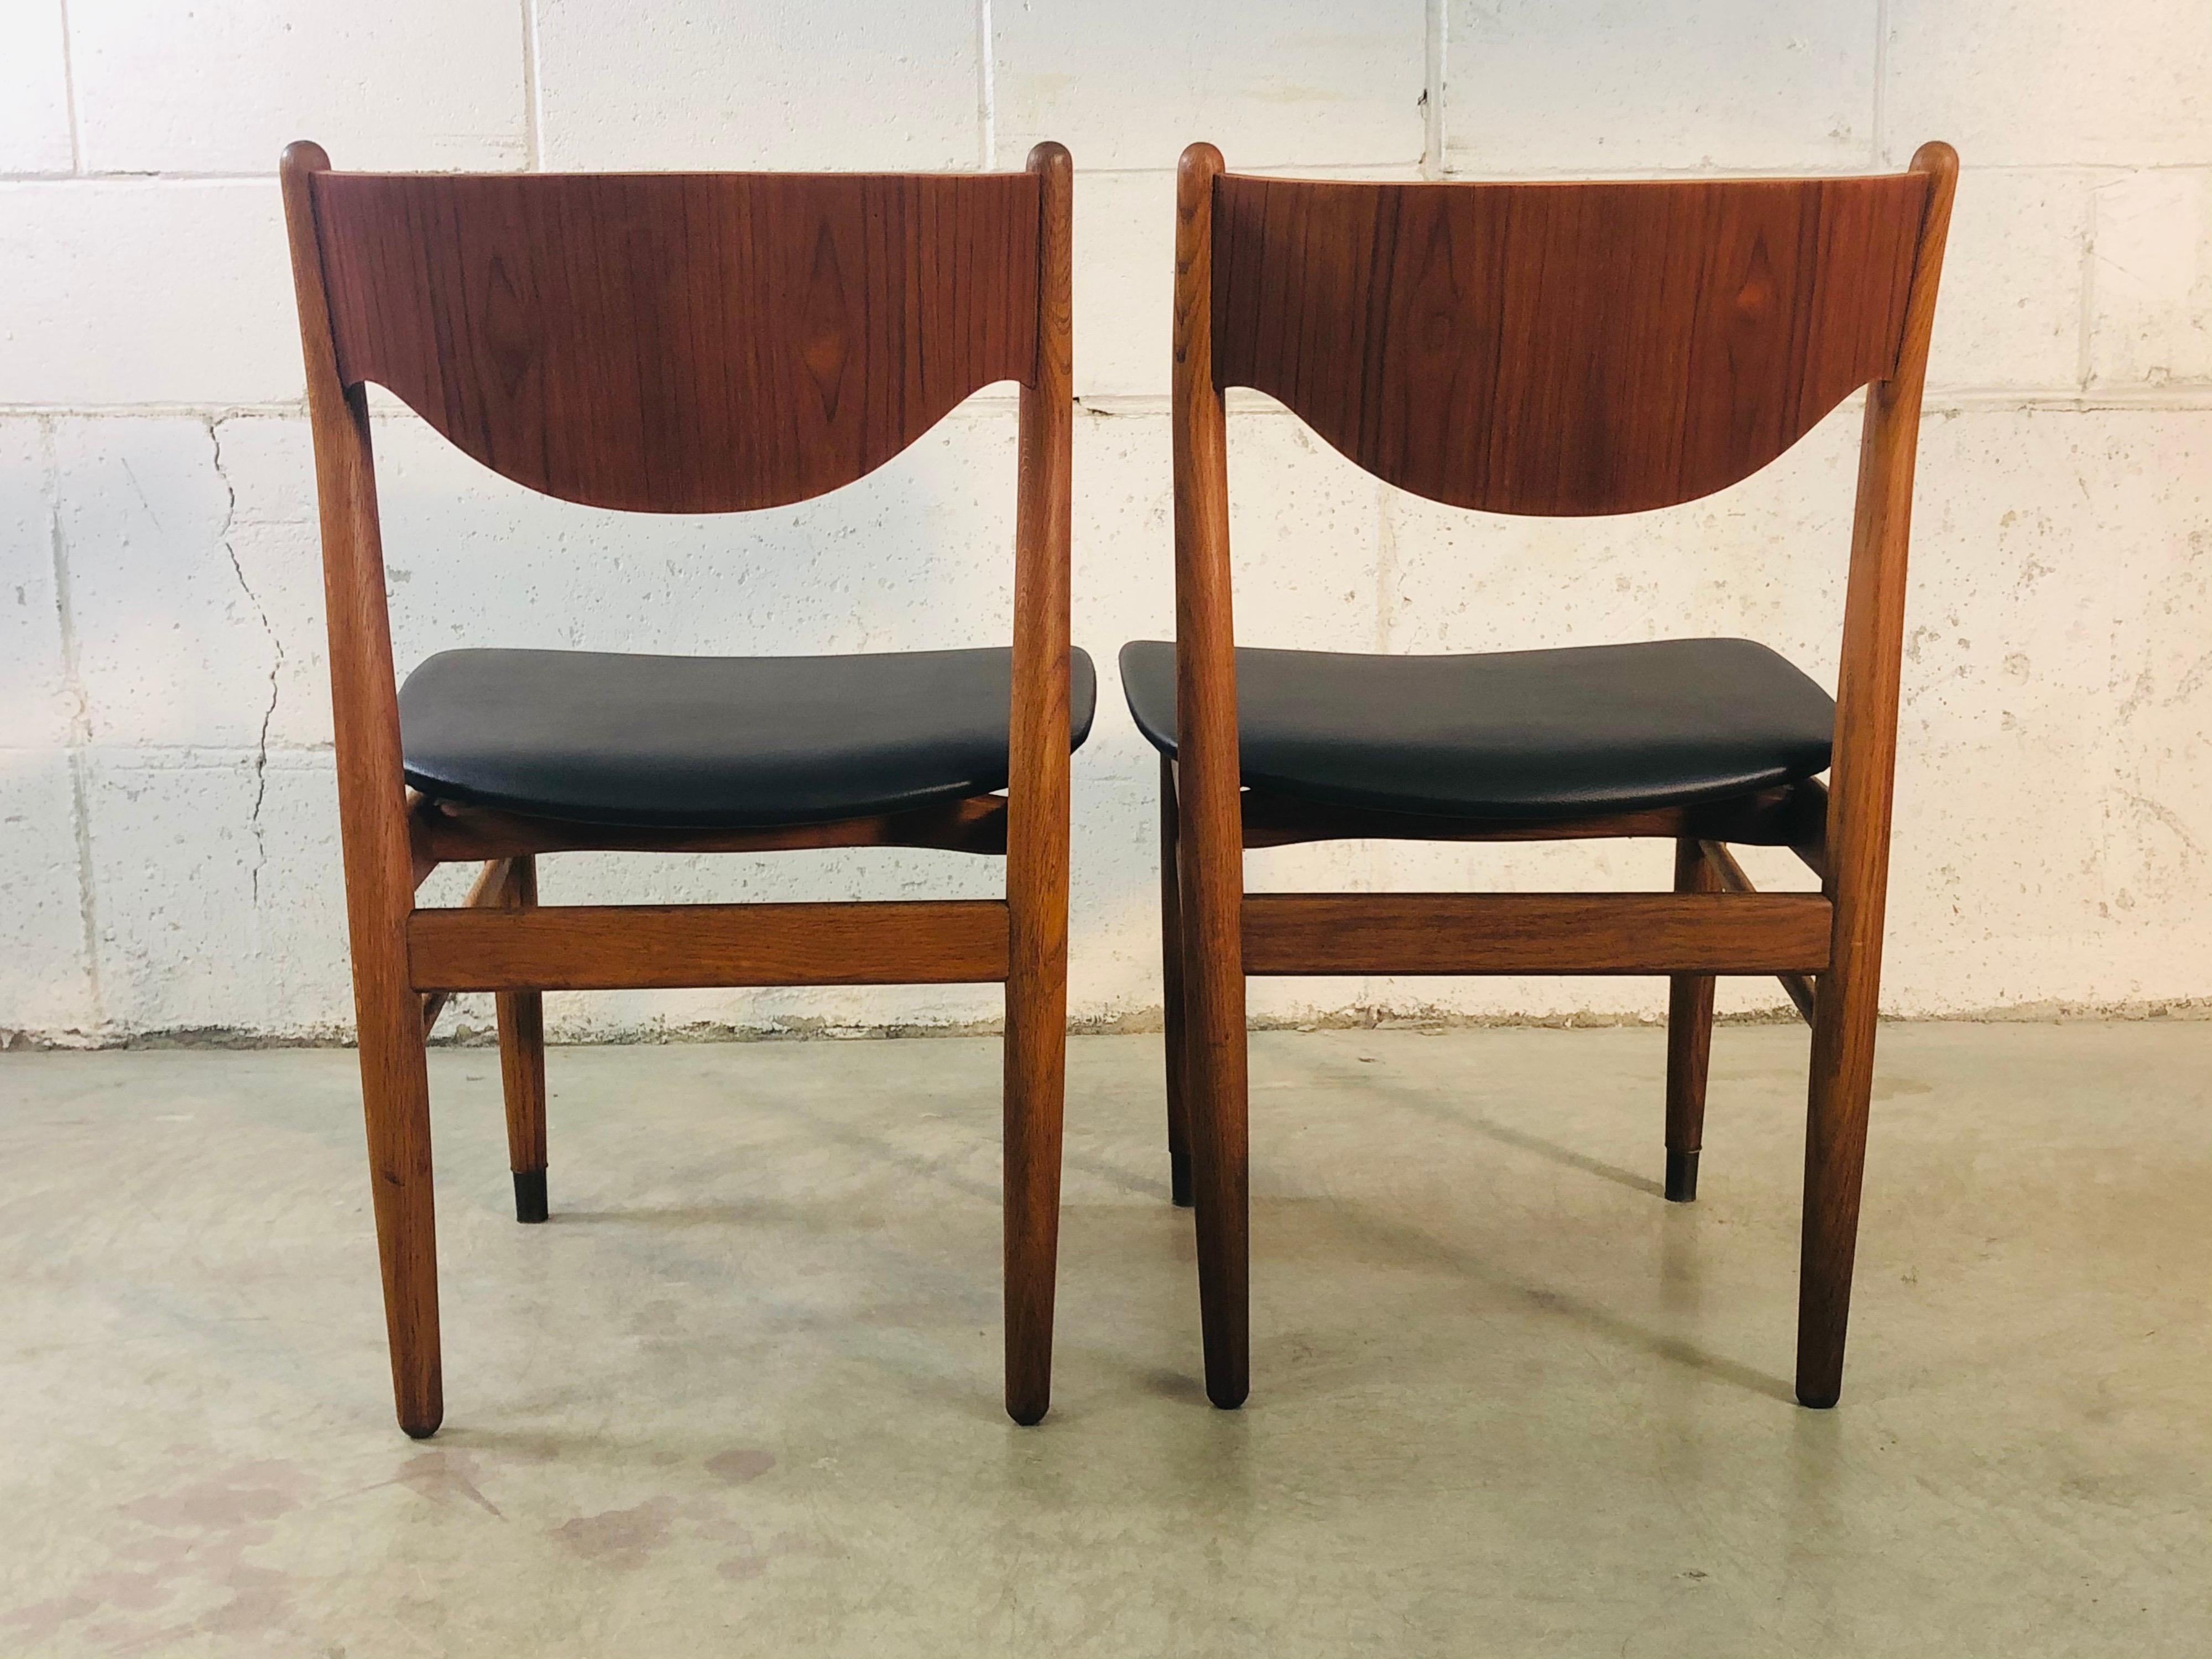 20th Century Vintage 1960s Danish Teak and Beech Wood Dining Chairs, Set of 4